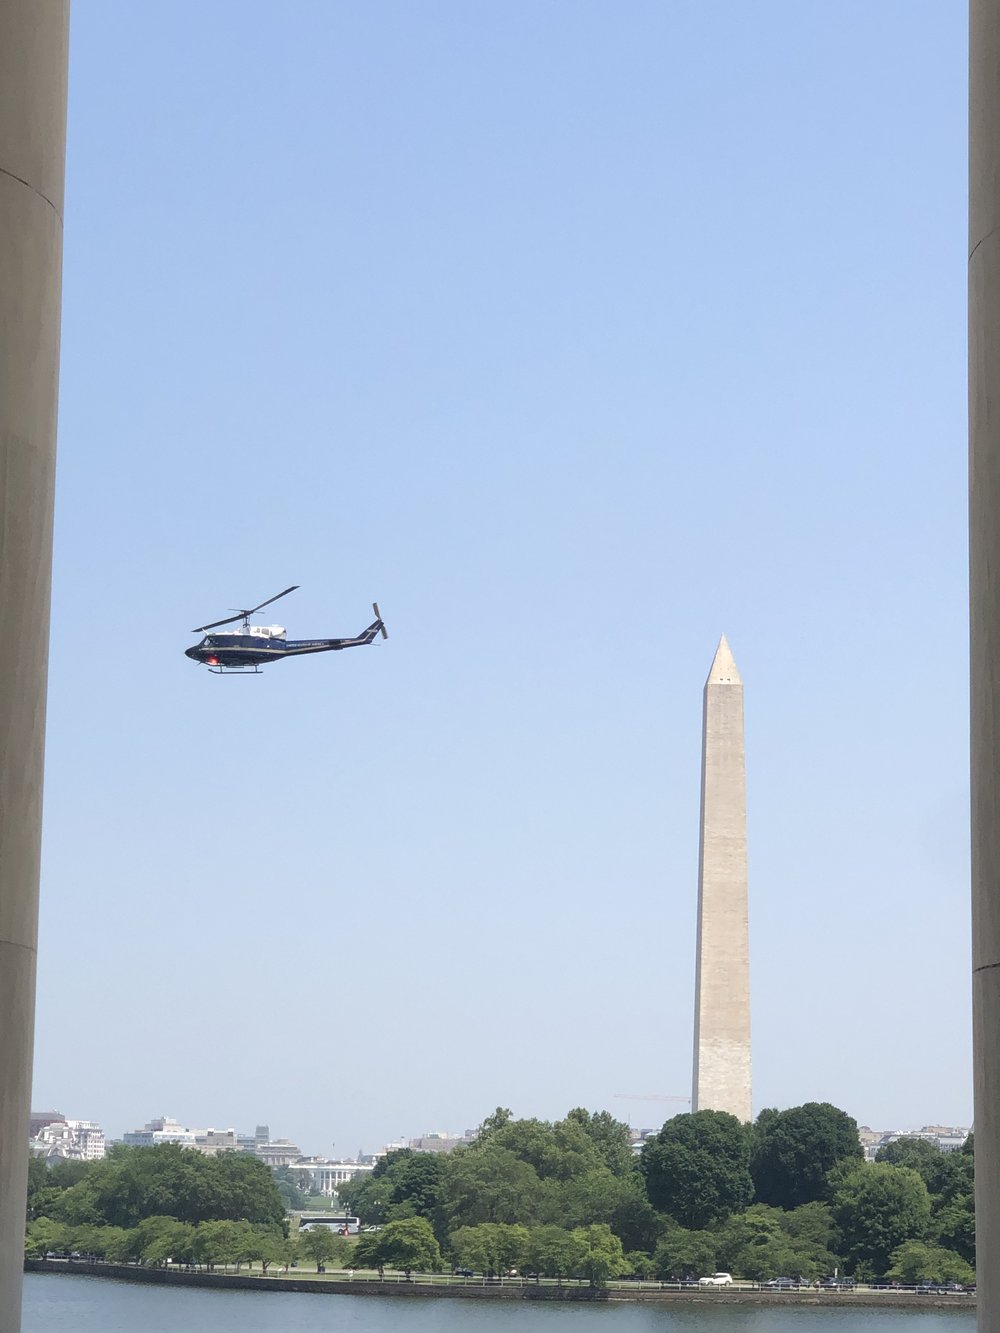 Helicopter by Washington Memorial--maybe the president! (It's a no-fly zone except Executives).